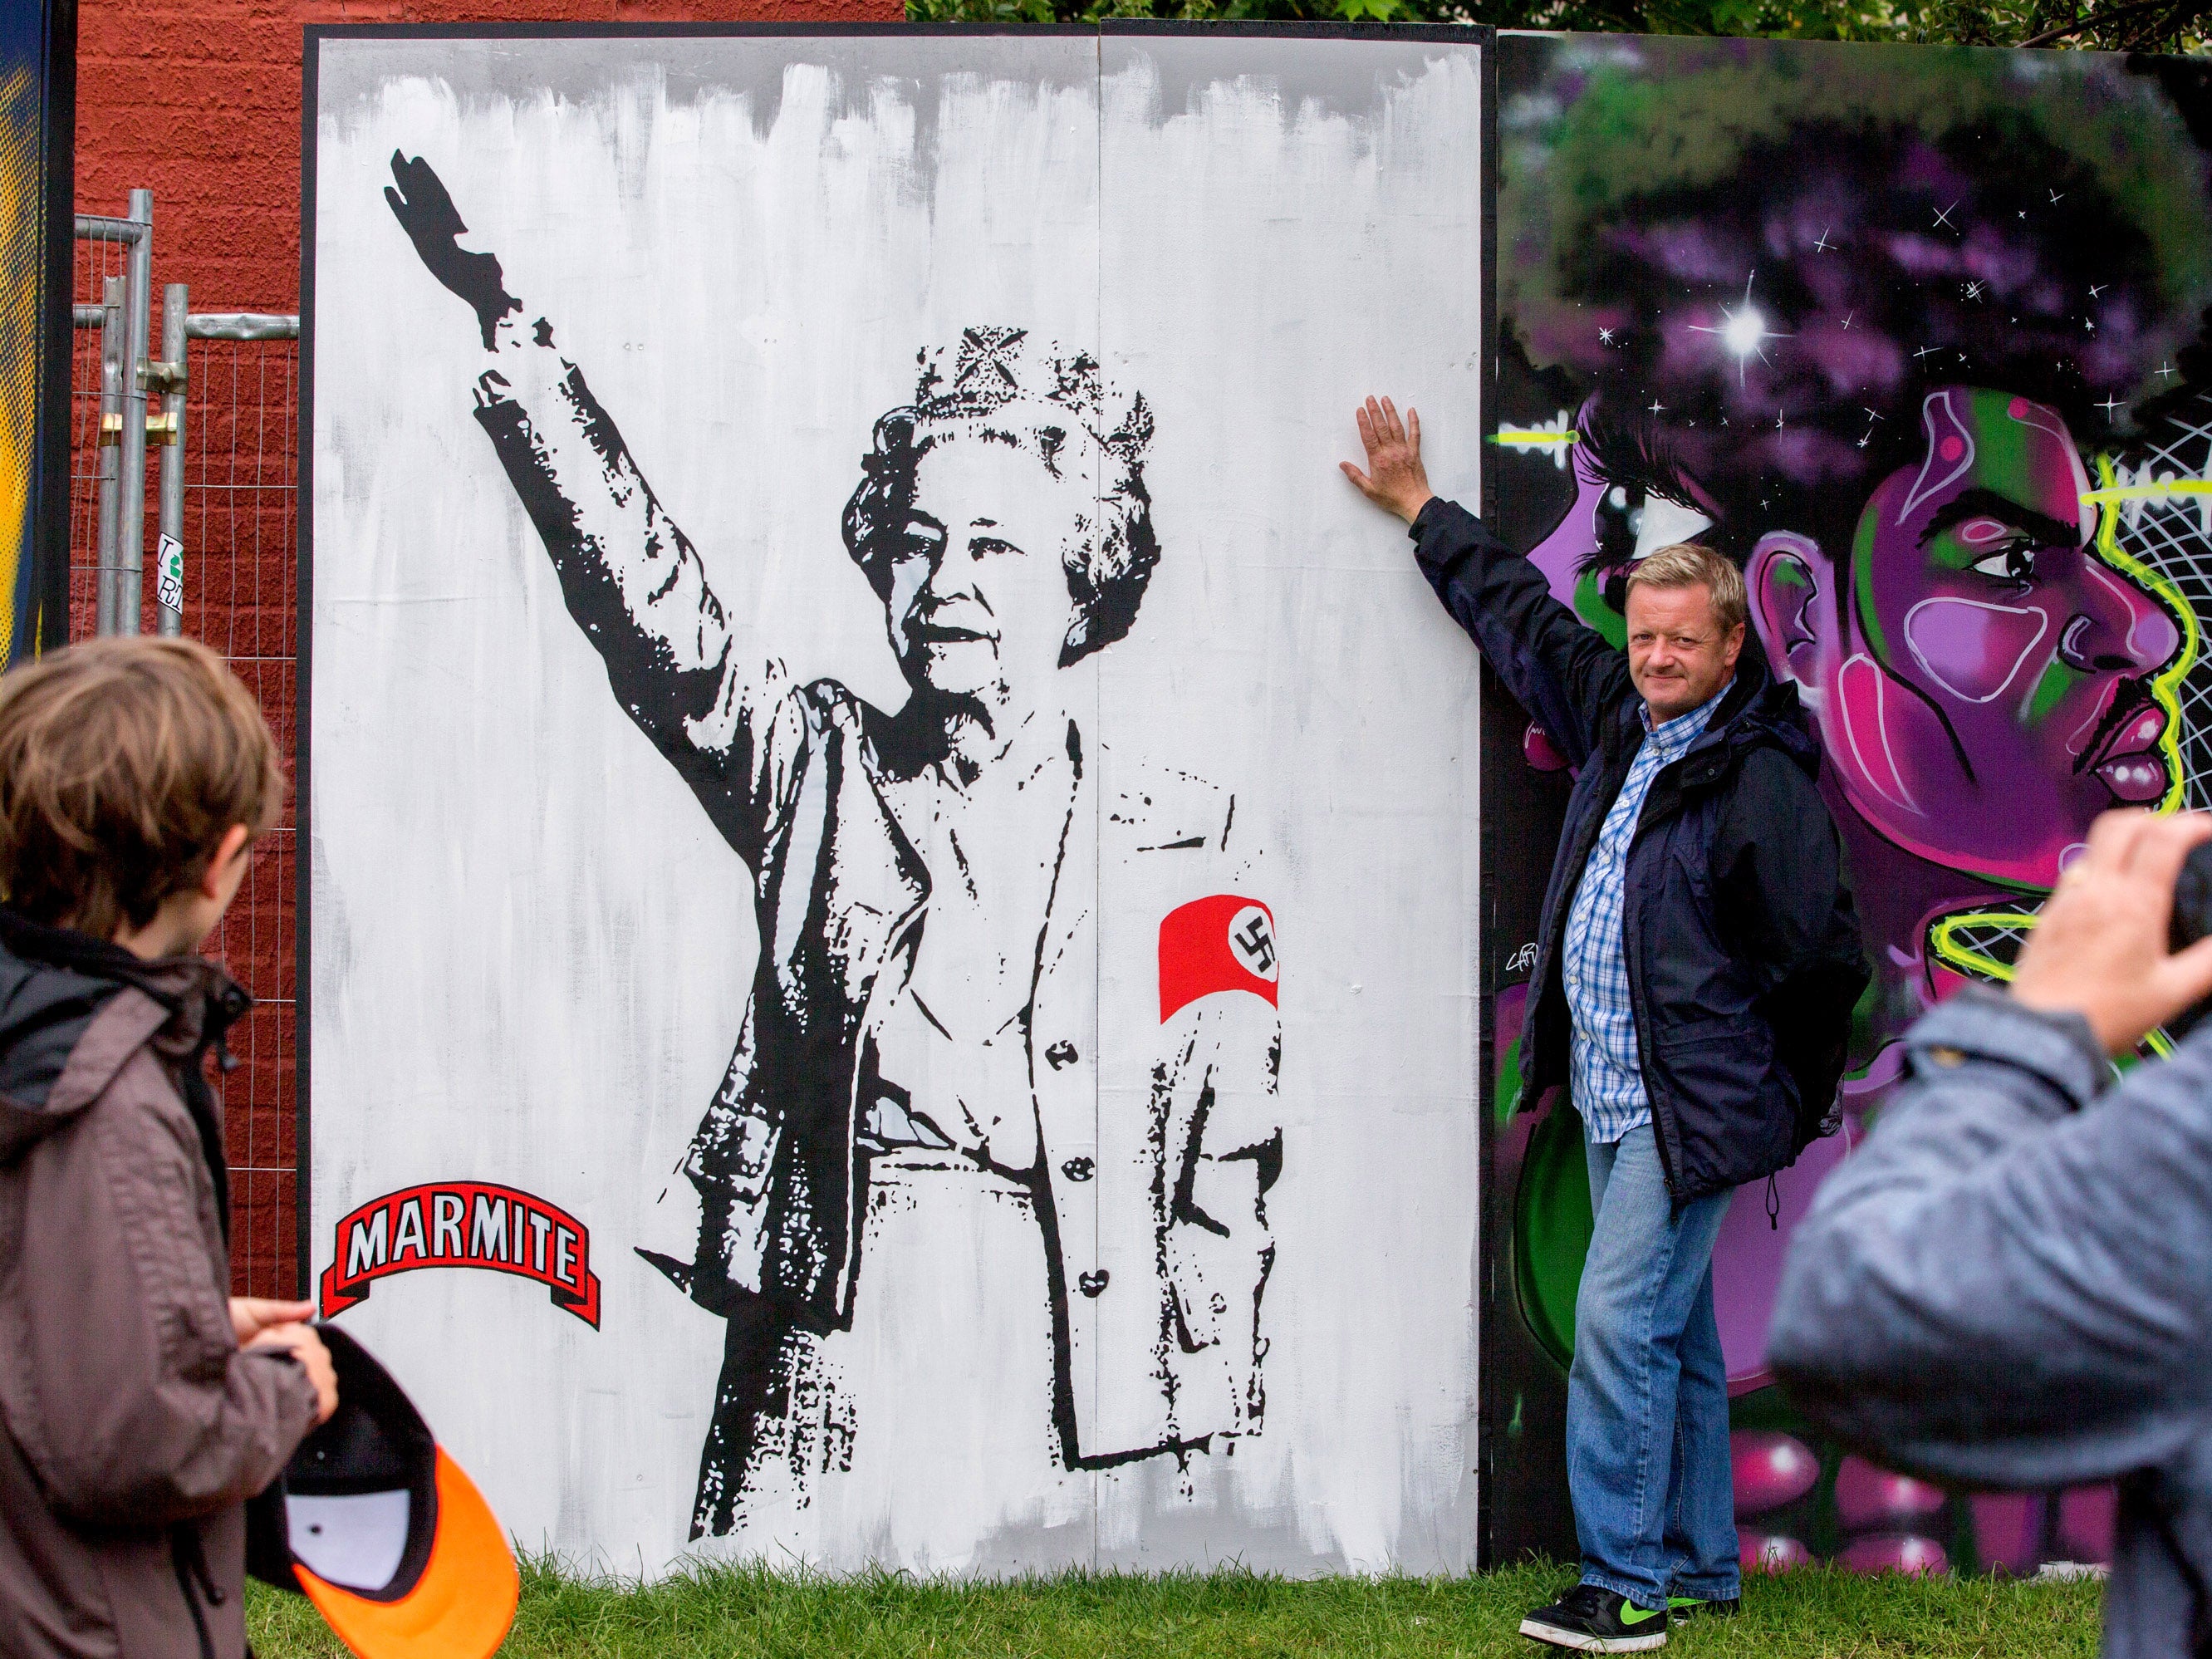 A Mural by artist T.wat referencing the Queen's recent nazi salute media controversy was a major attraction at the festival.